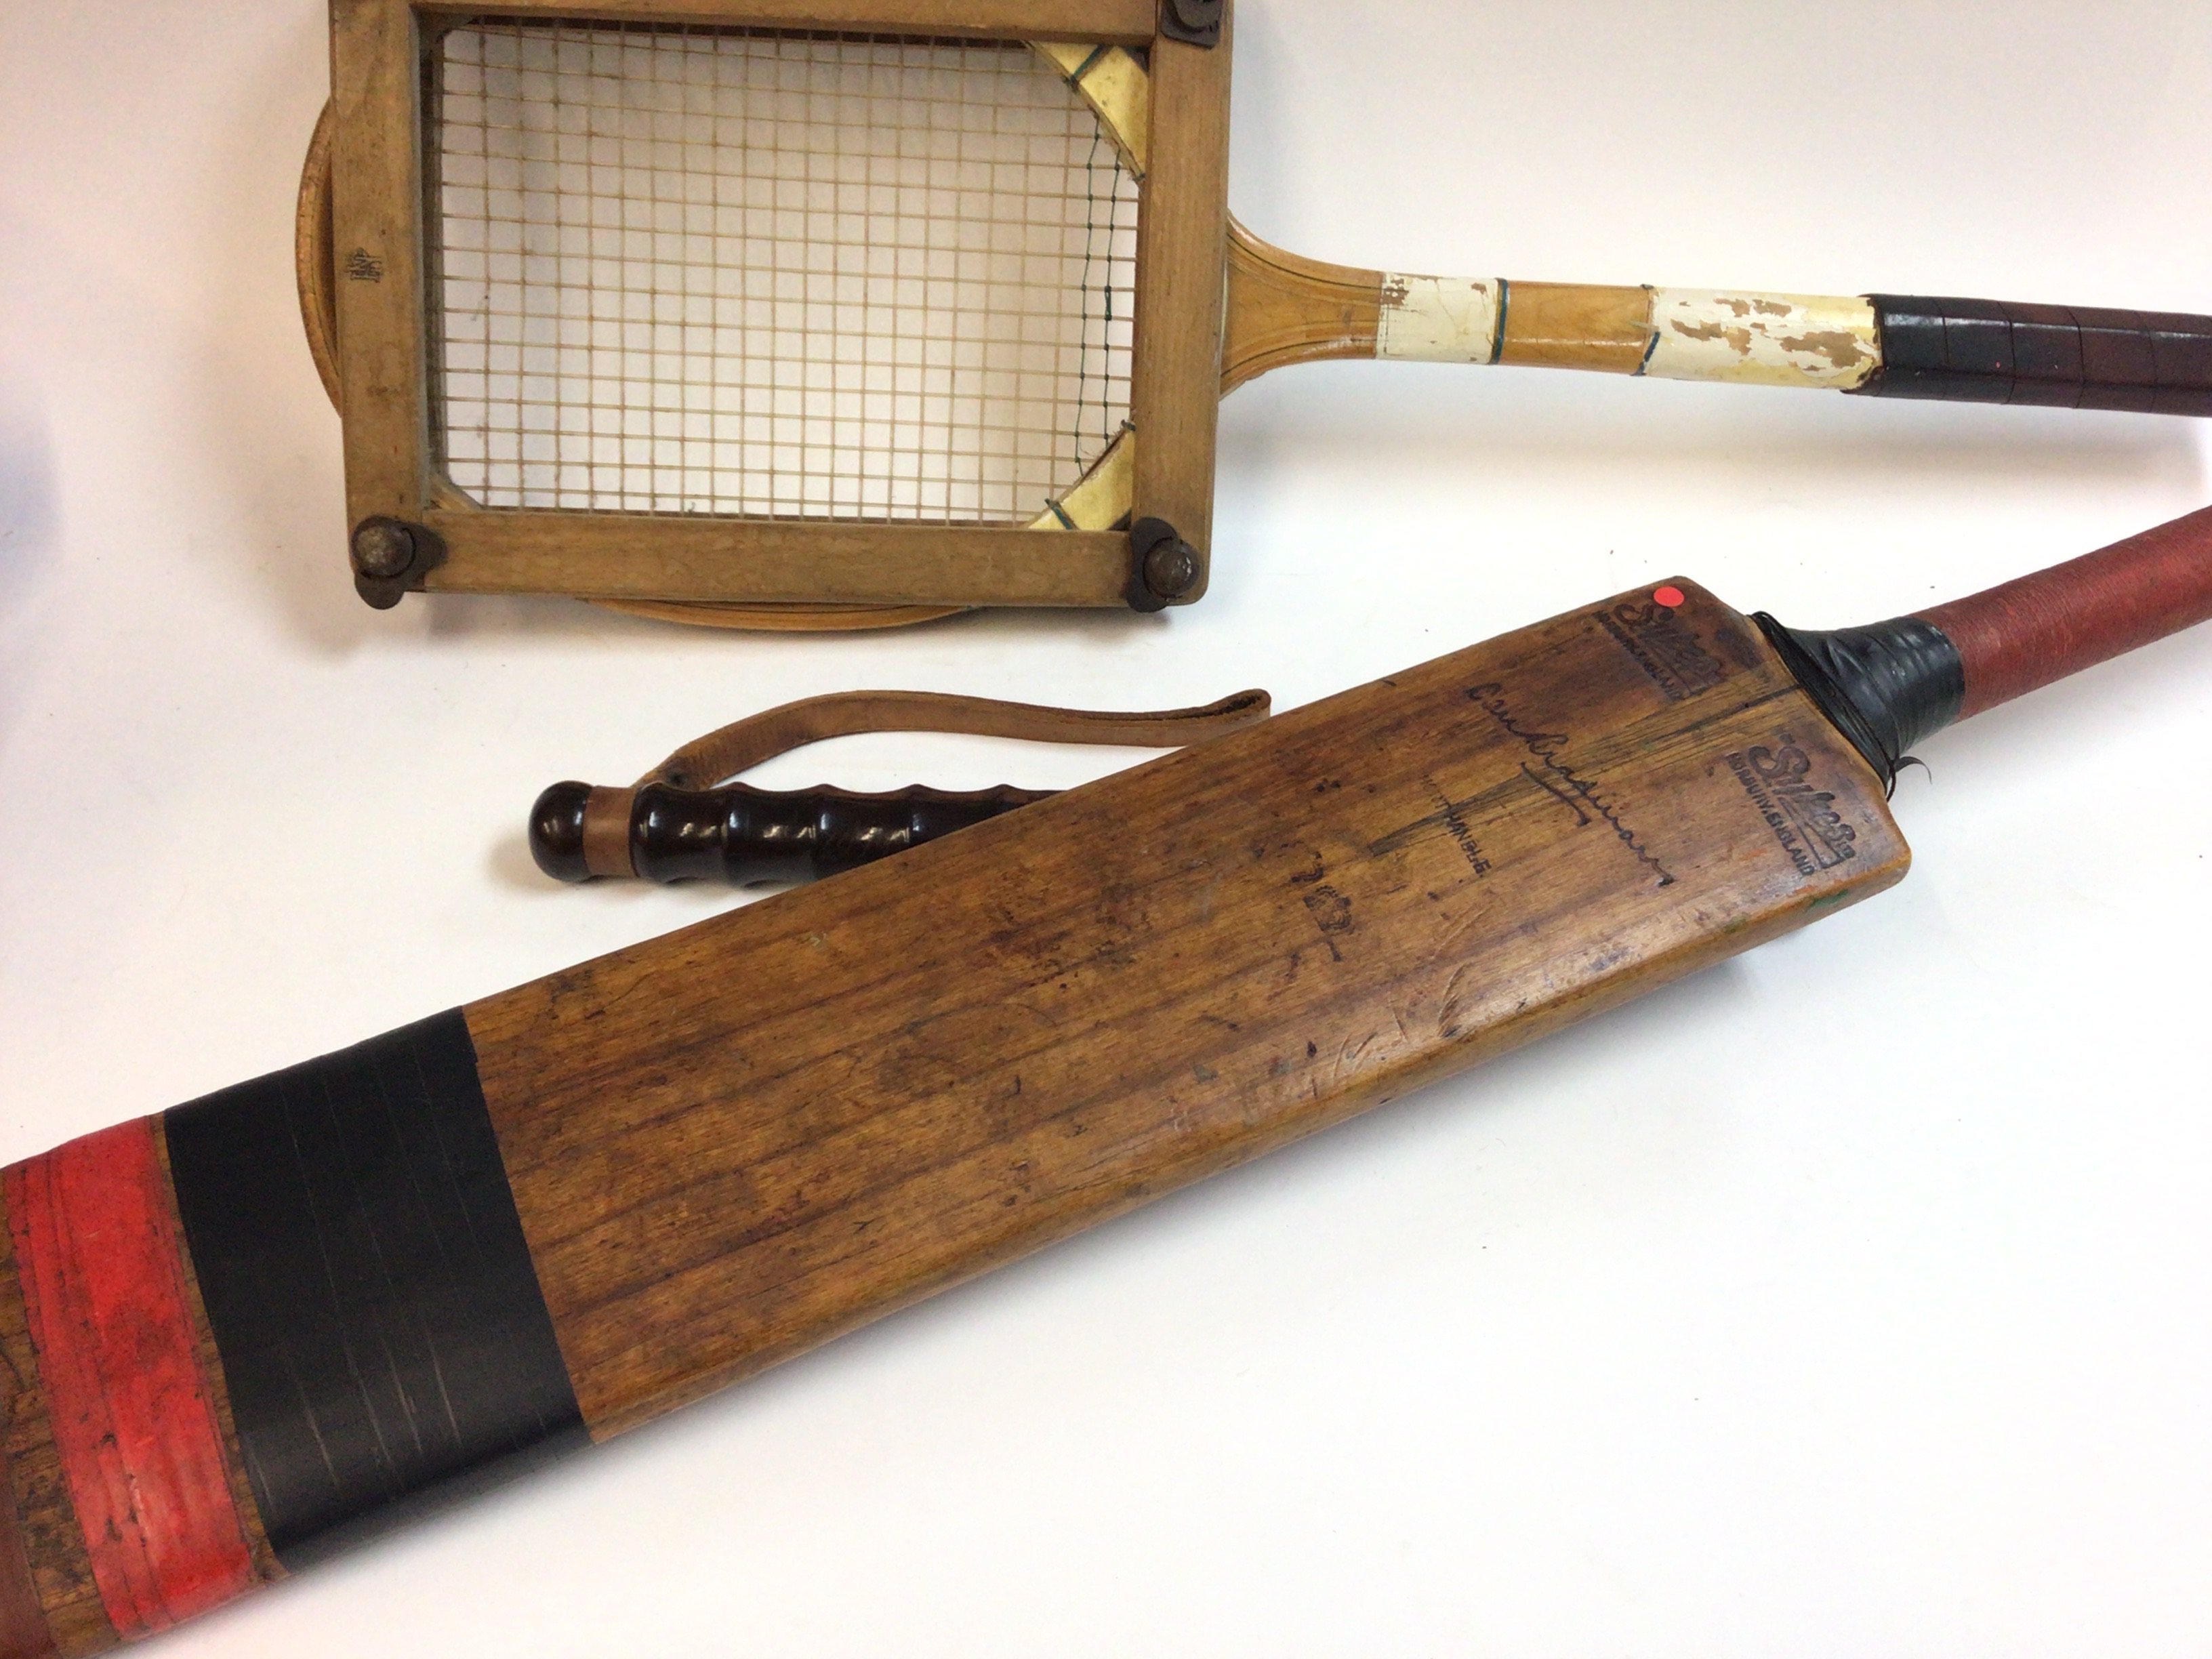 An old cricket bat along with a vintage tennis rac - Image 2 of 3